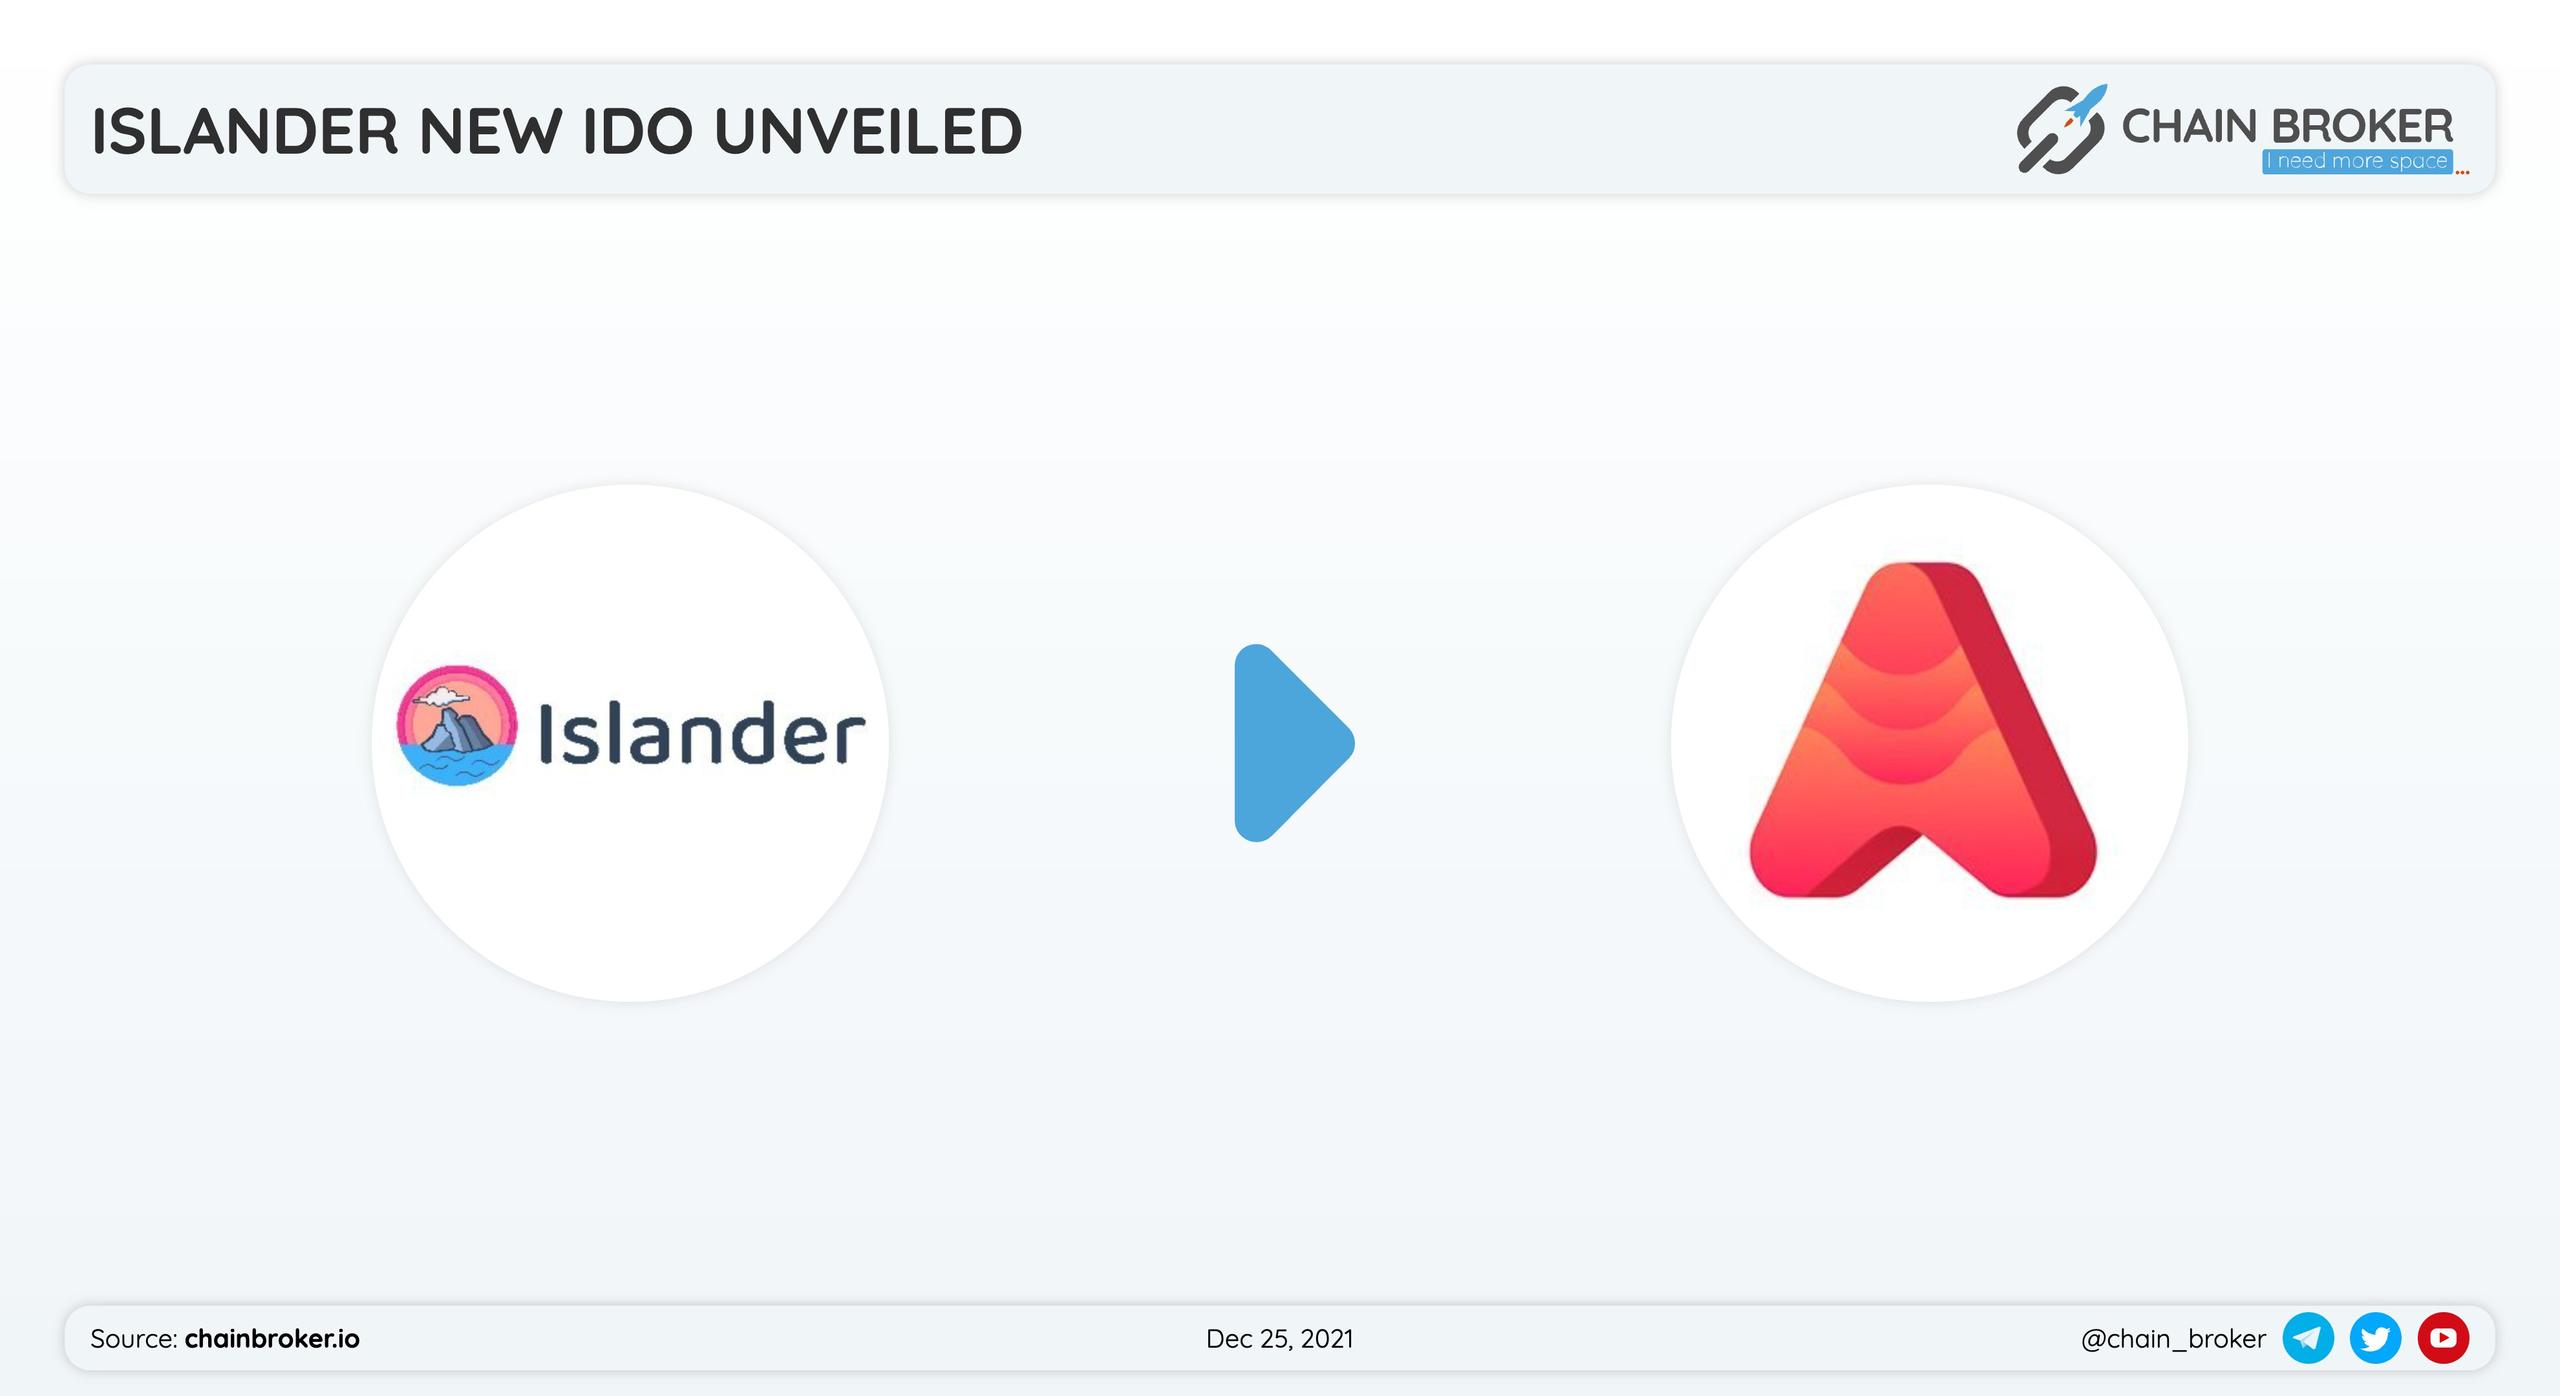 Islander $ISA has partnered with Avalaunch for a token launch.